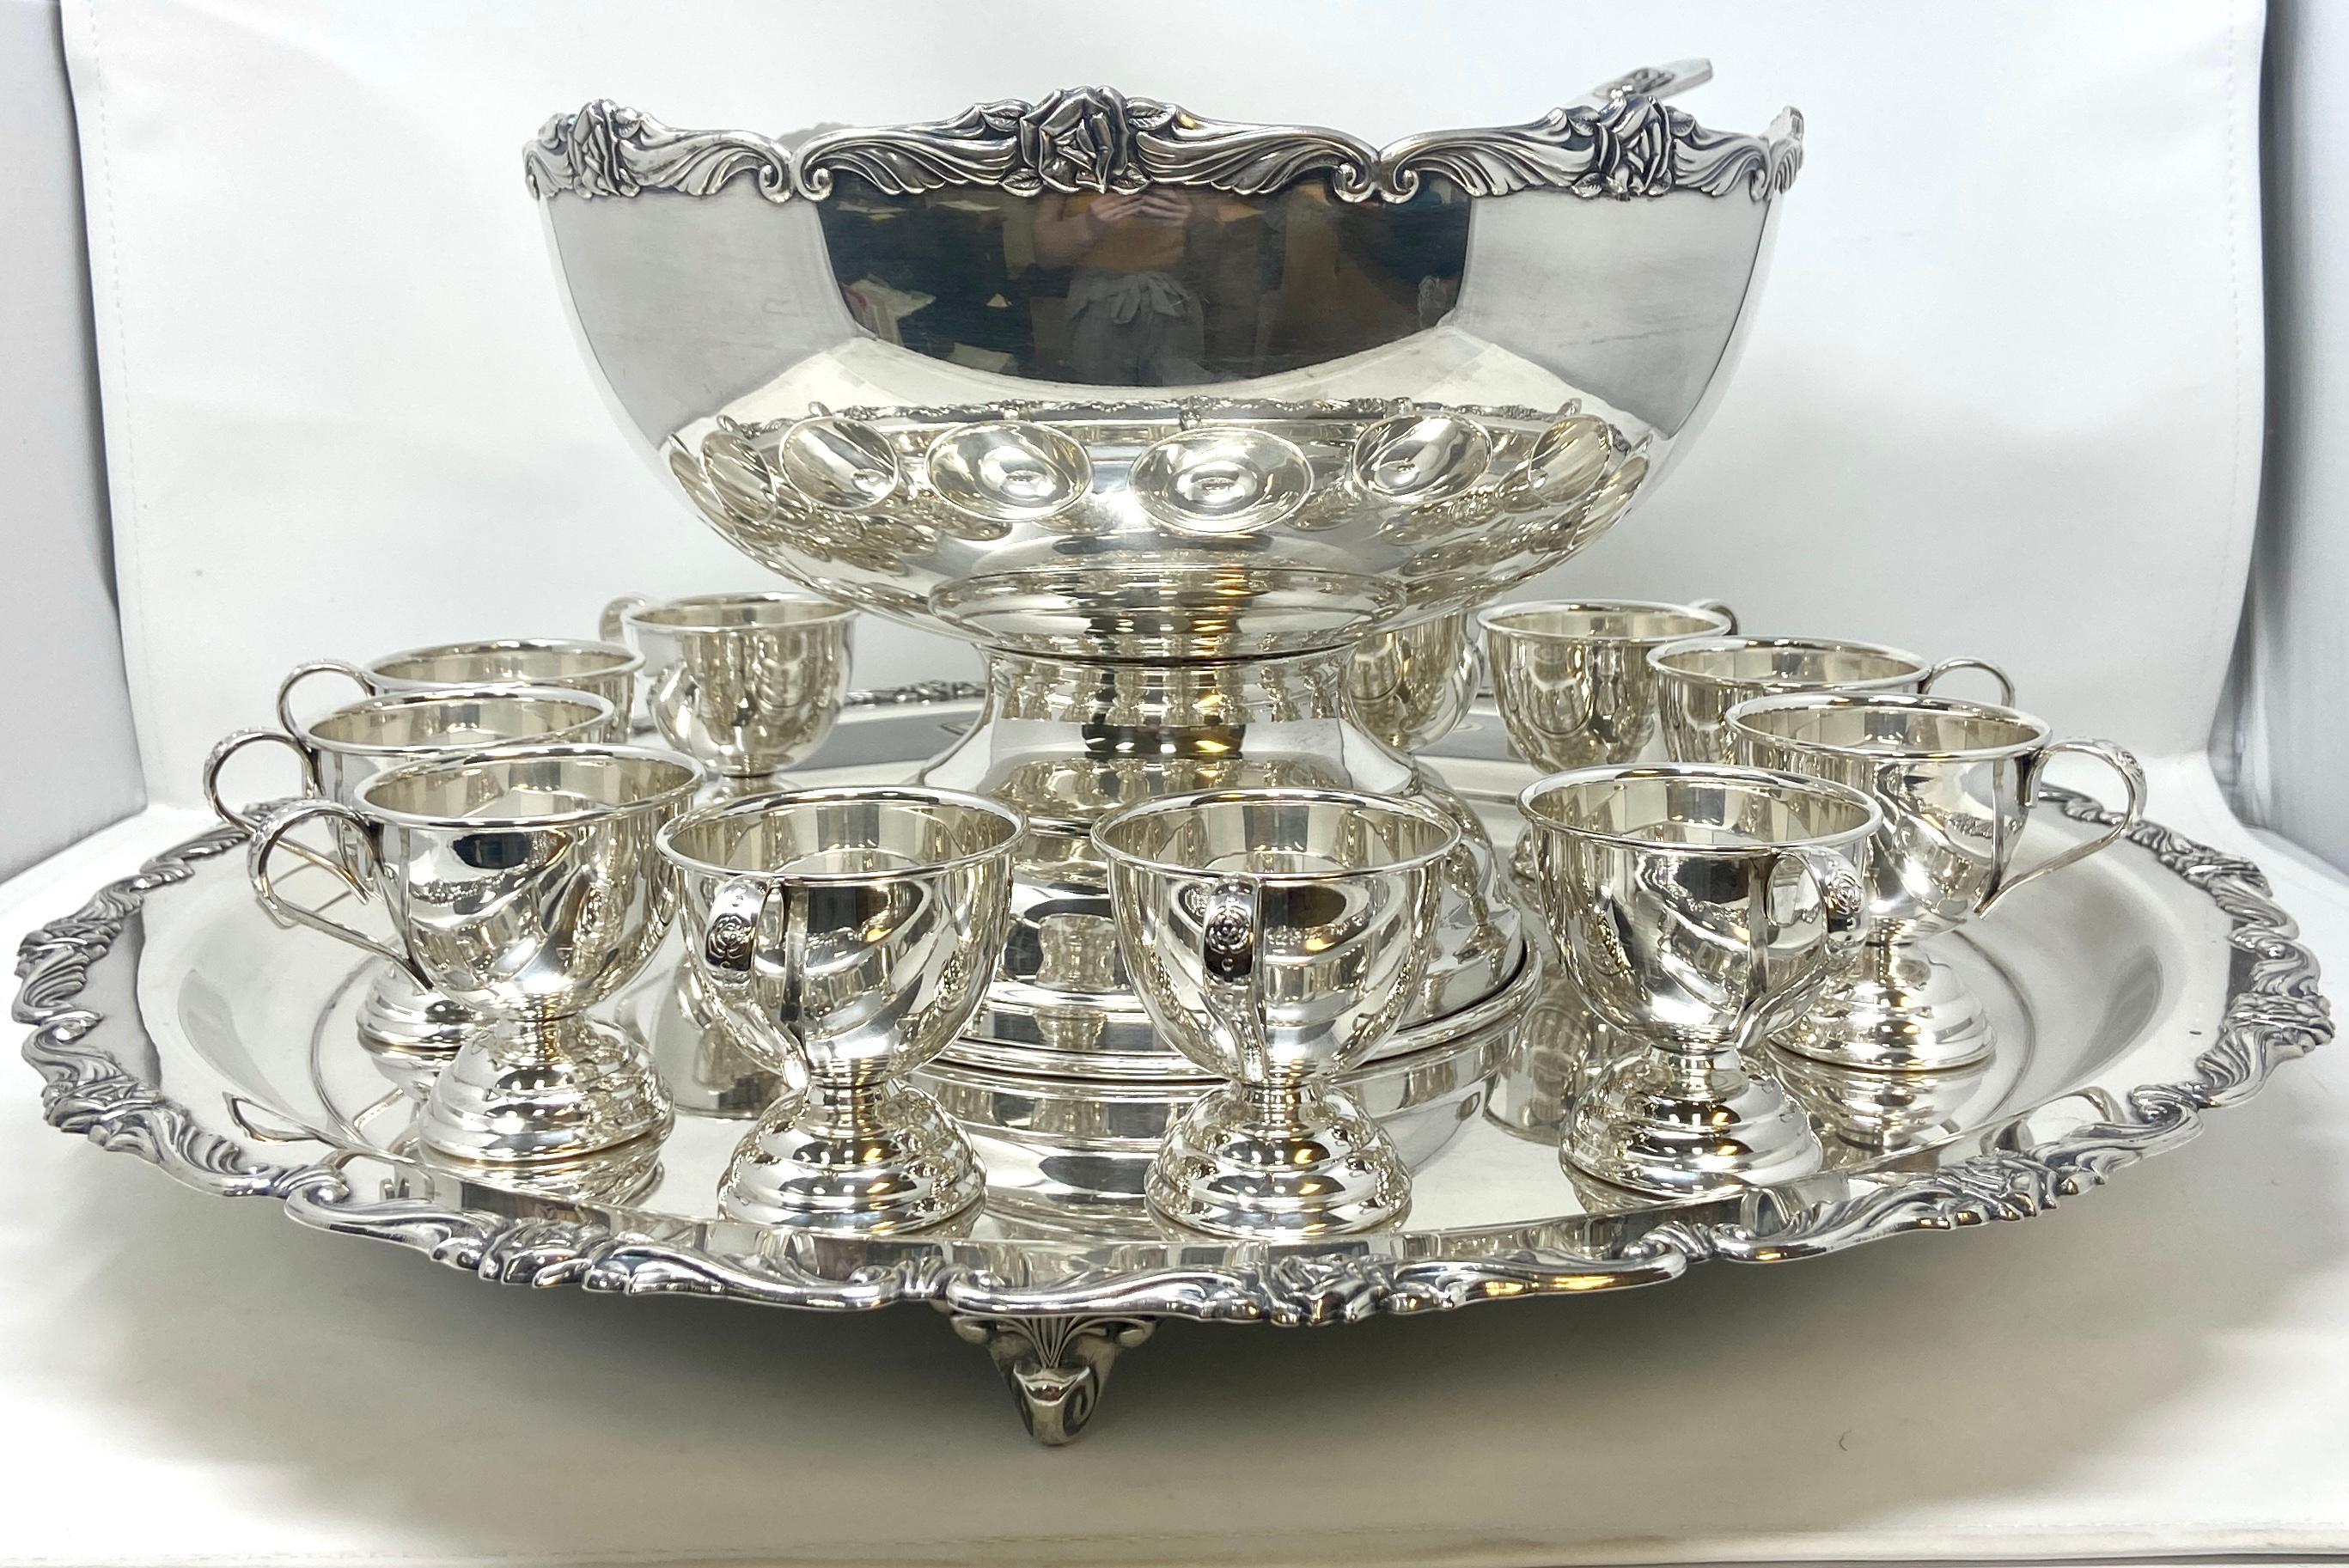 Estate silver-plated full punch bowl service with 12 footed cups, tray, and ladle, Circa 1950's. 
15 matching pieces in a classic Japanese Rose Design.
Overall: 11